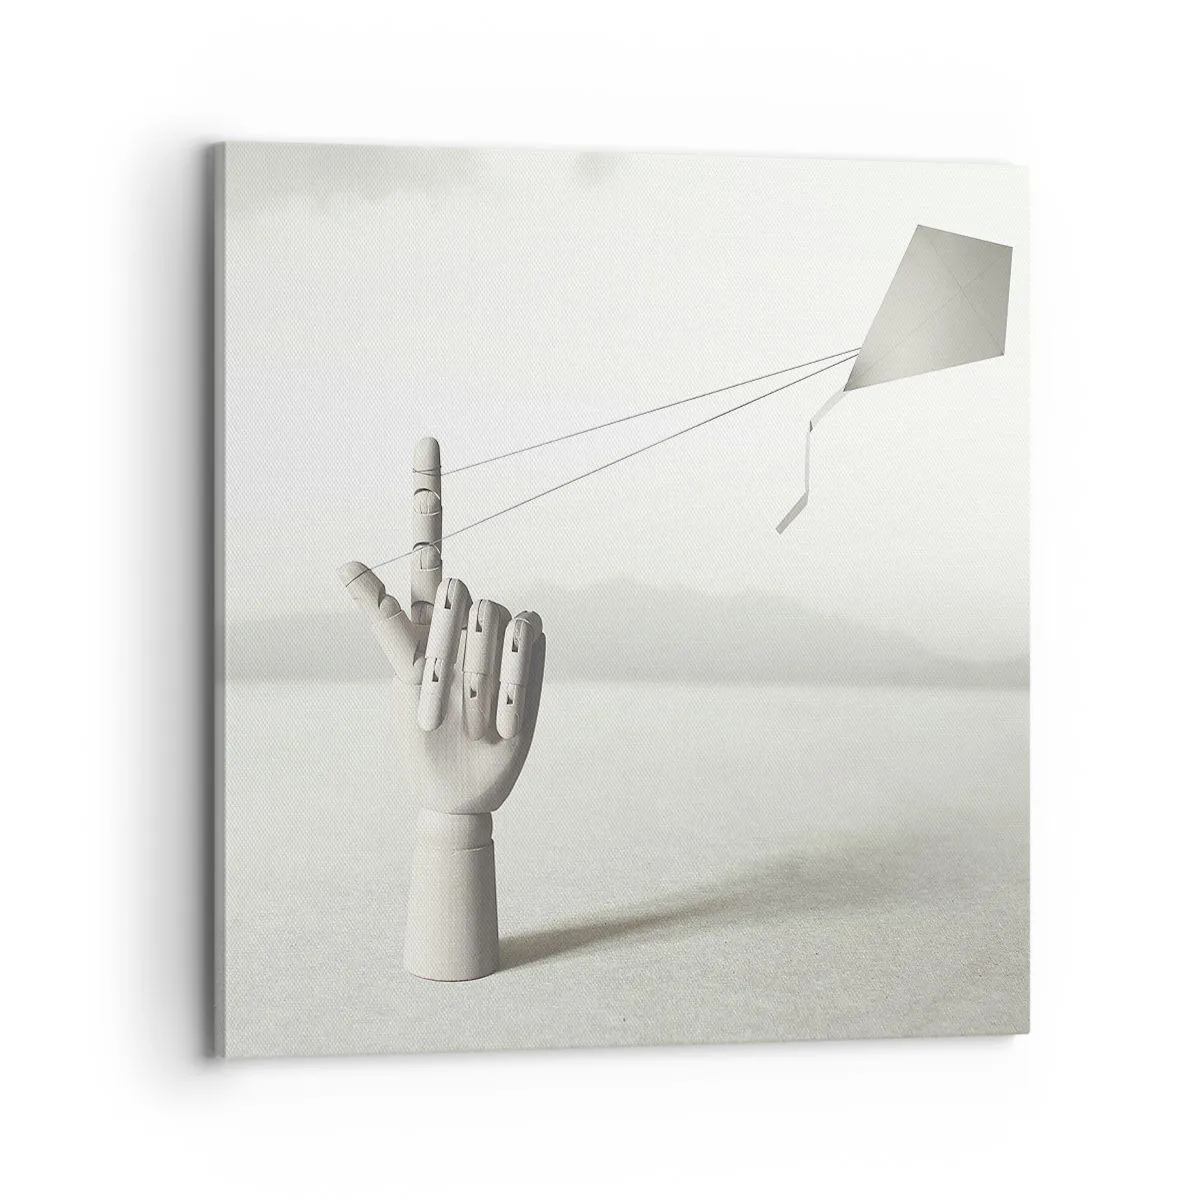 Canvas picture Arttor 70x70 cm - Test of Strengths - Abstraction, Hand, Kite, Art, Black And White, For living-room, For bedroom, White, Grey, Horizontal, Canvas
, AC70x70-4697